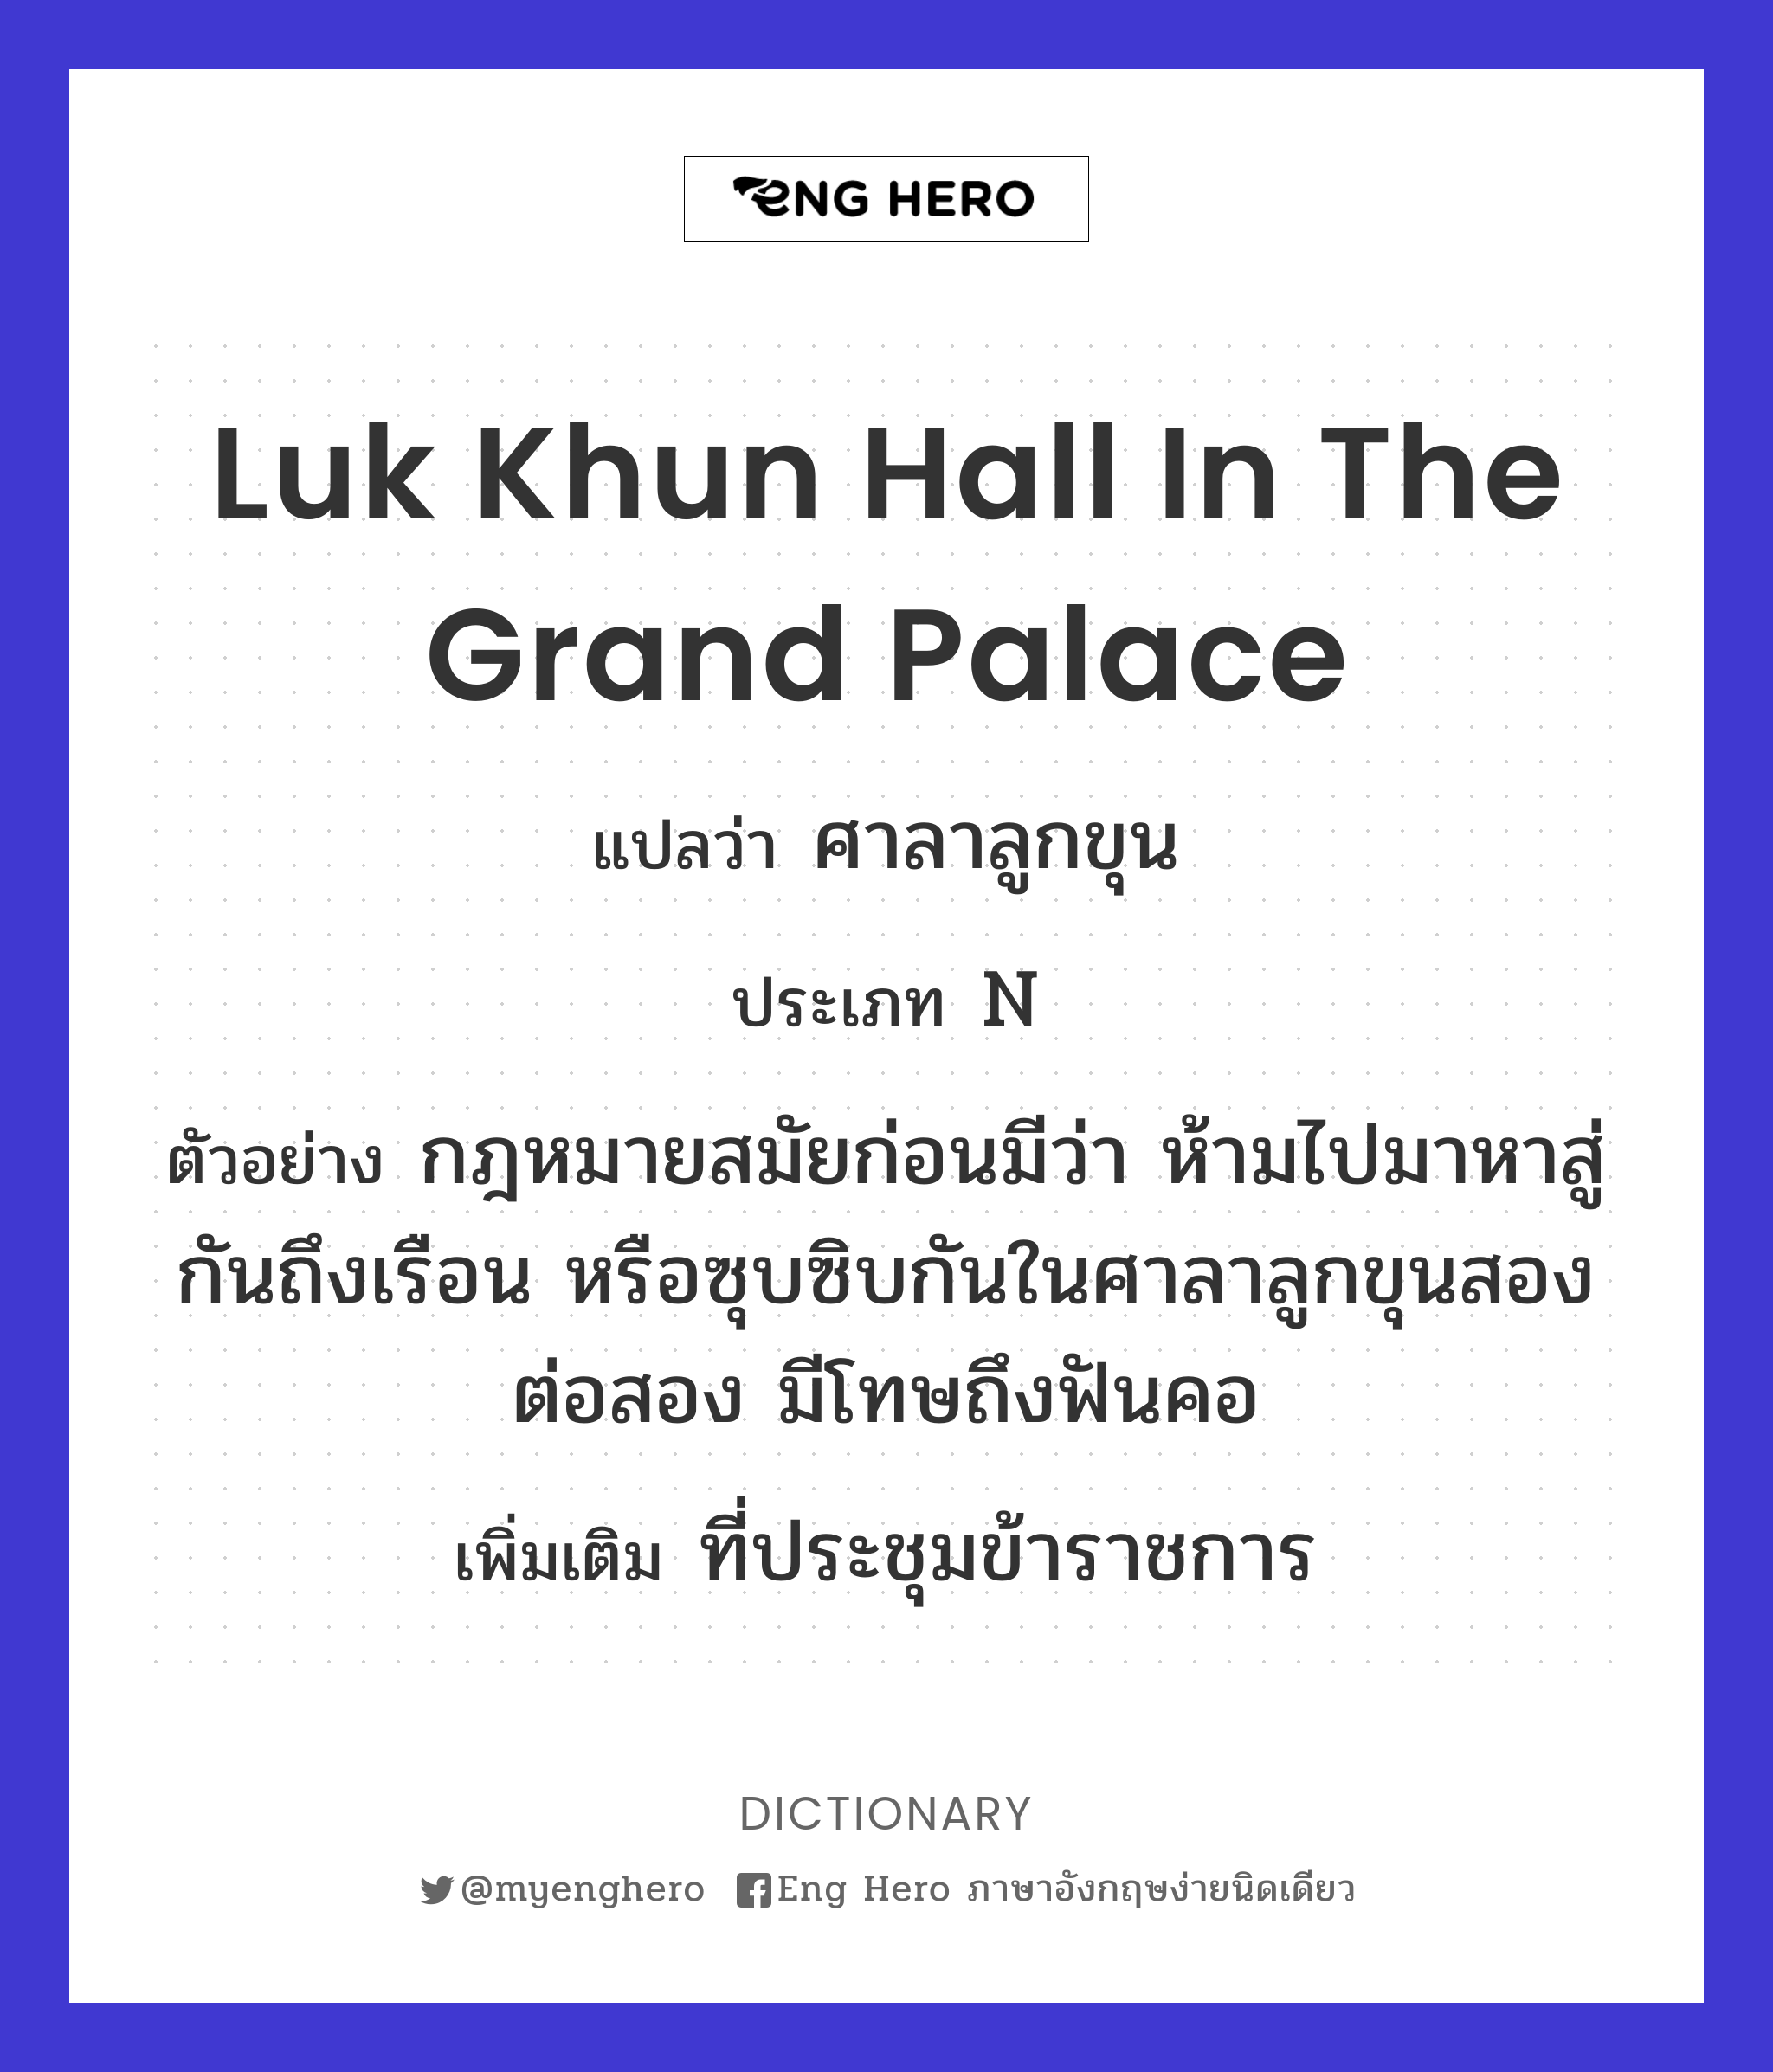 Luk Khun Hall in the Grand Palace